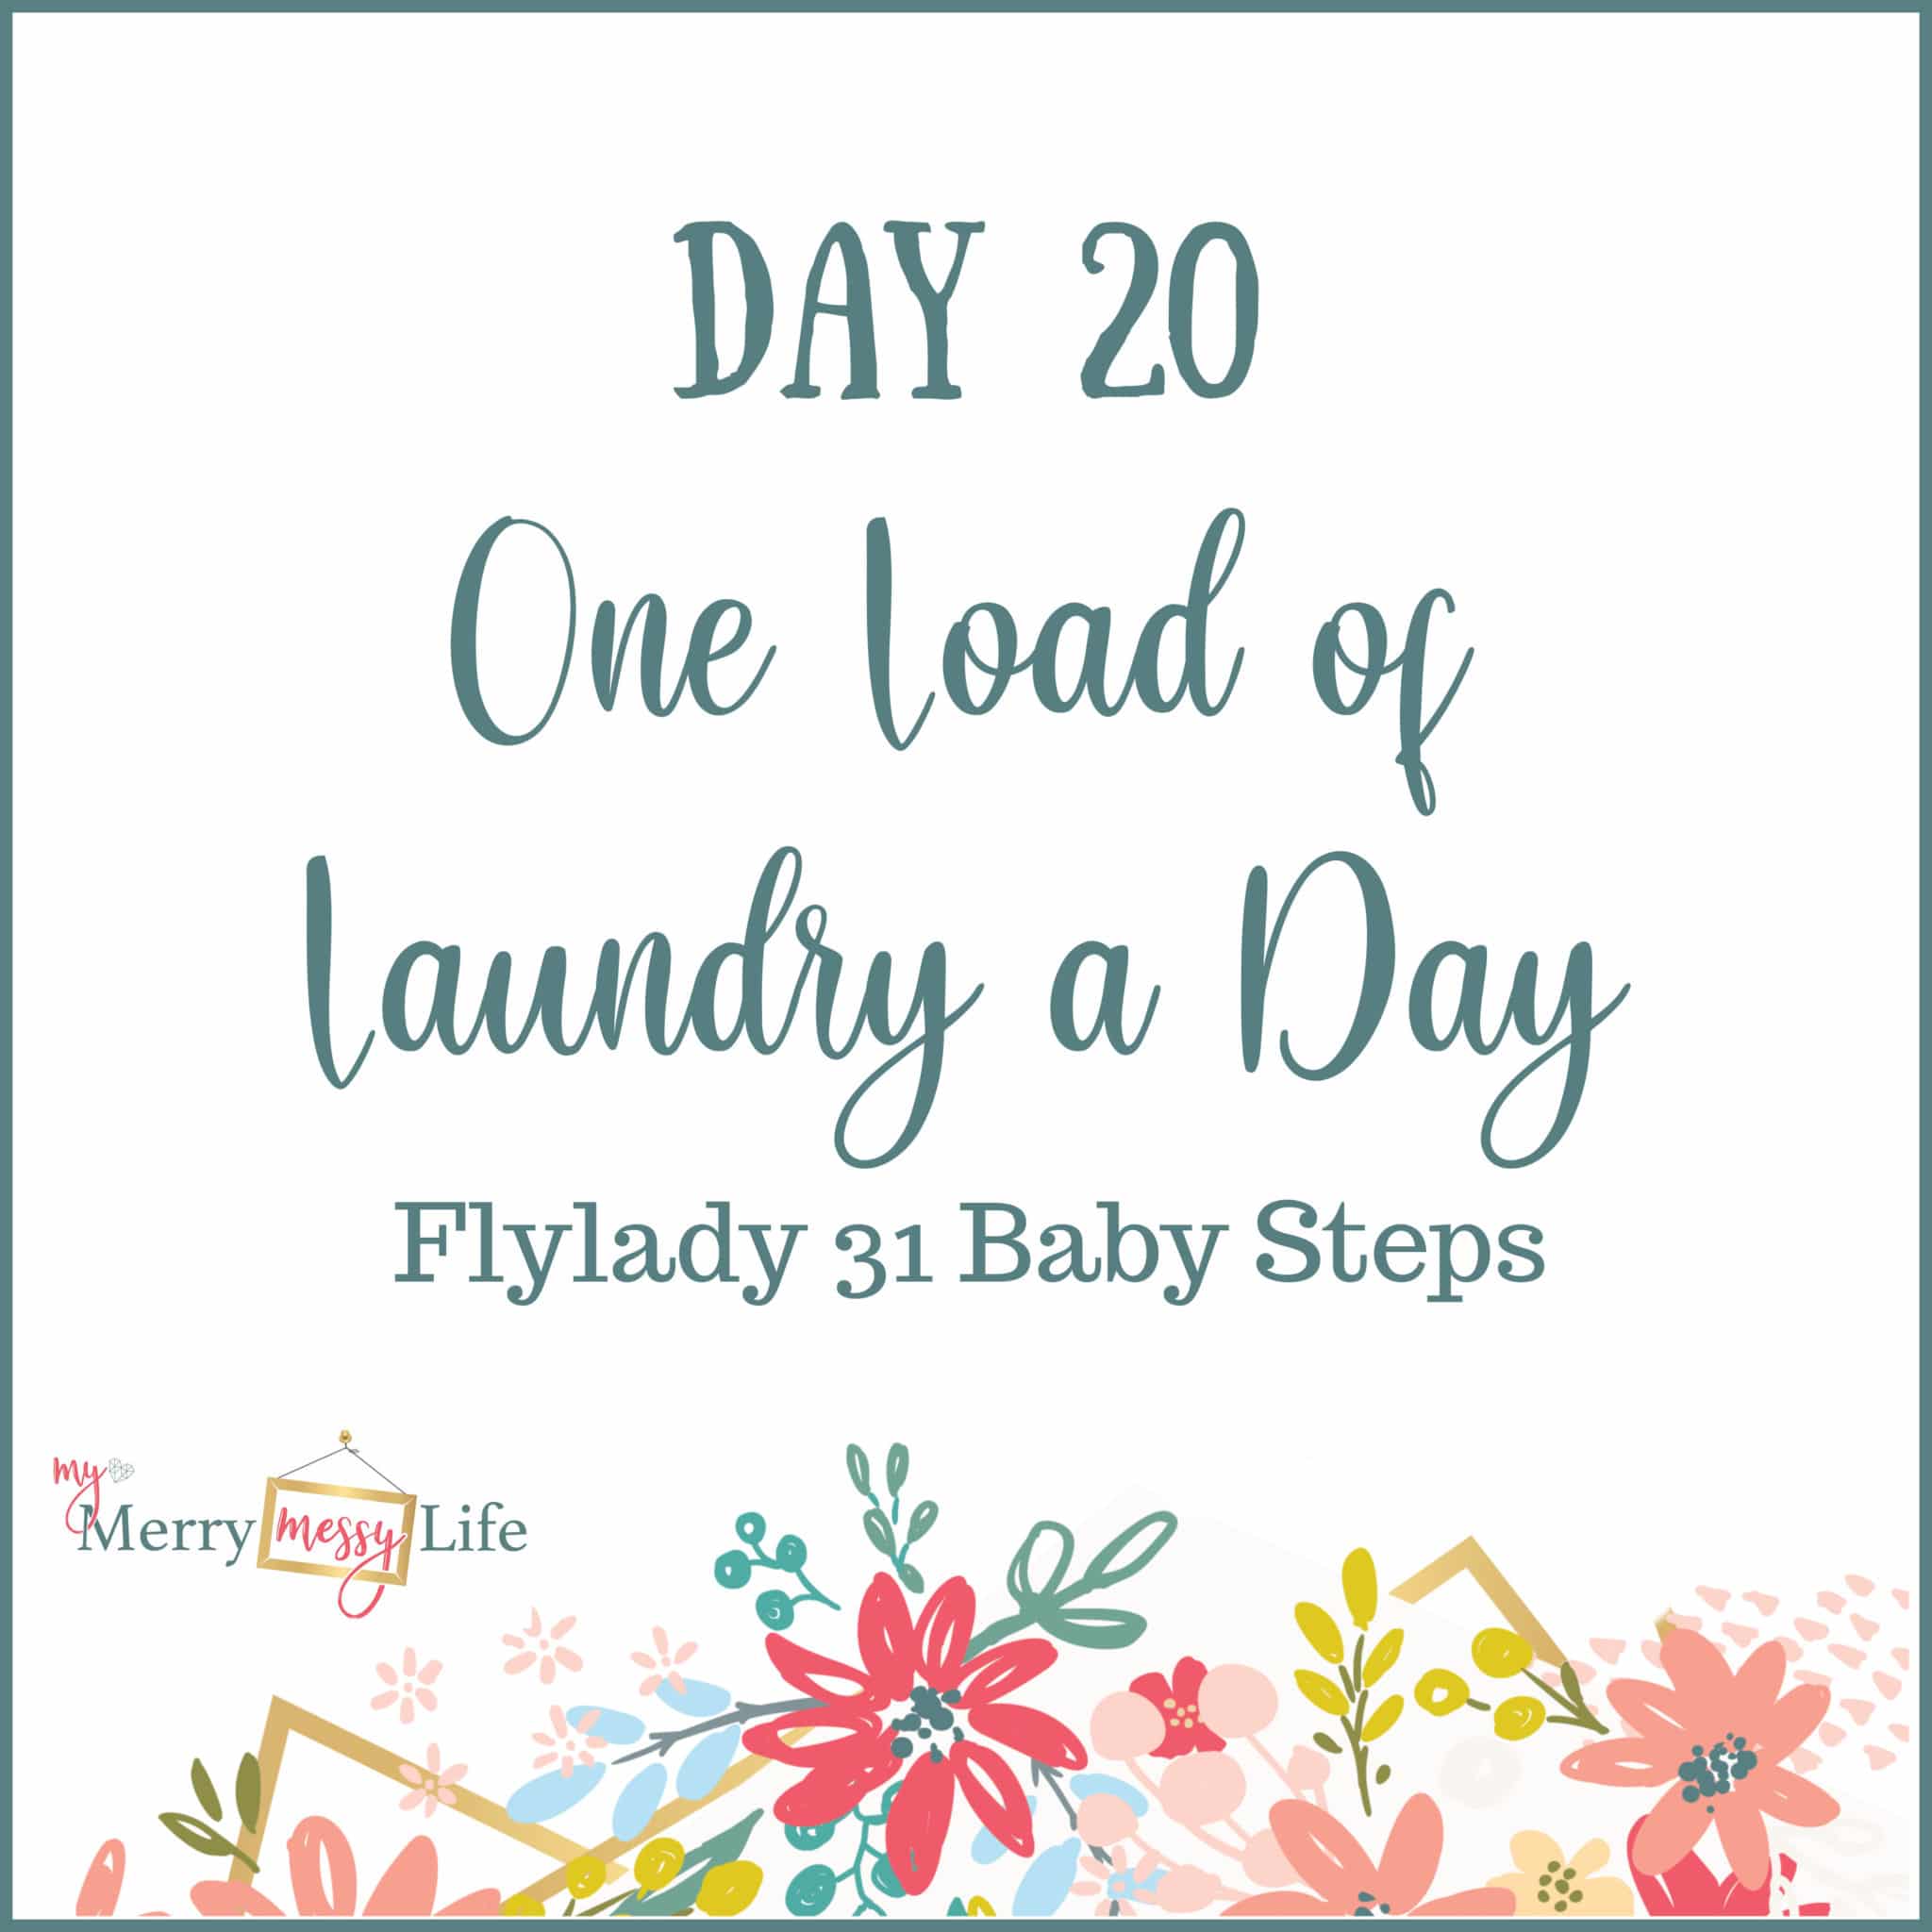 Flylady 31 Baby Steps - Day 20 - One Load of Laundry a Day